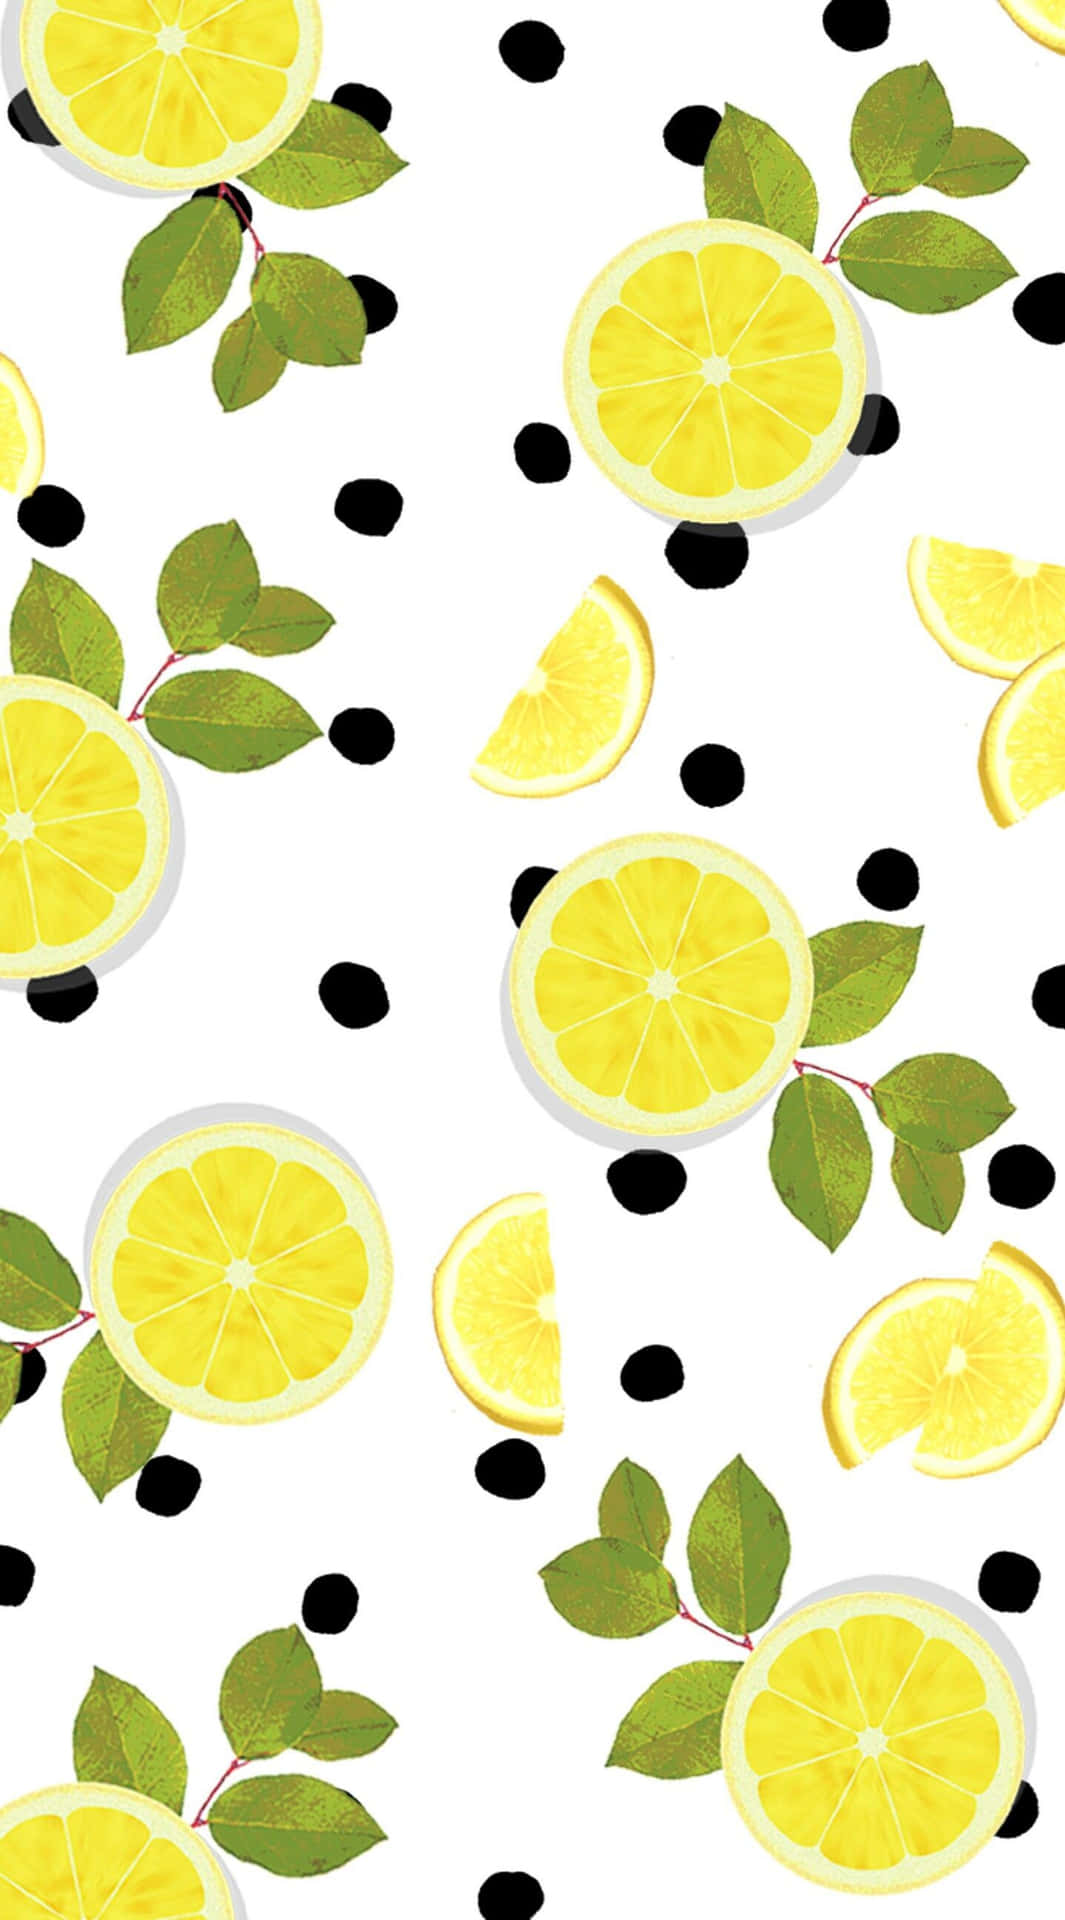 The Lemon Iphone - Packed with Bright, Vibrant Color Wallpaper